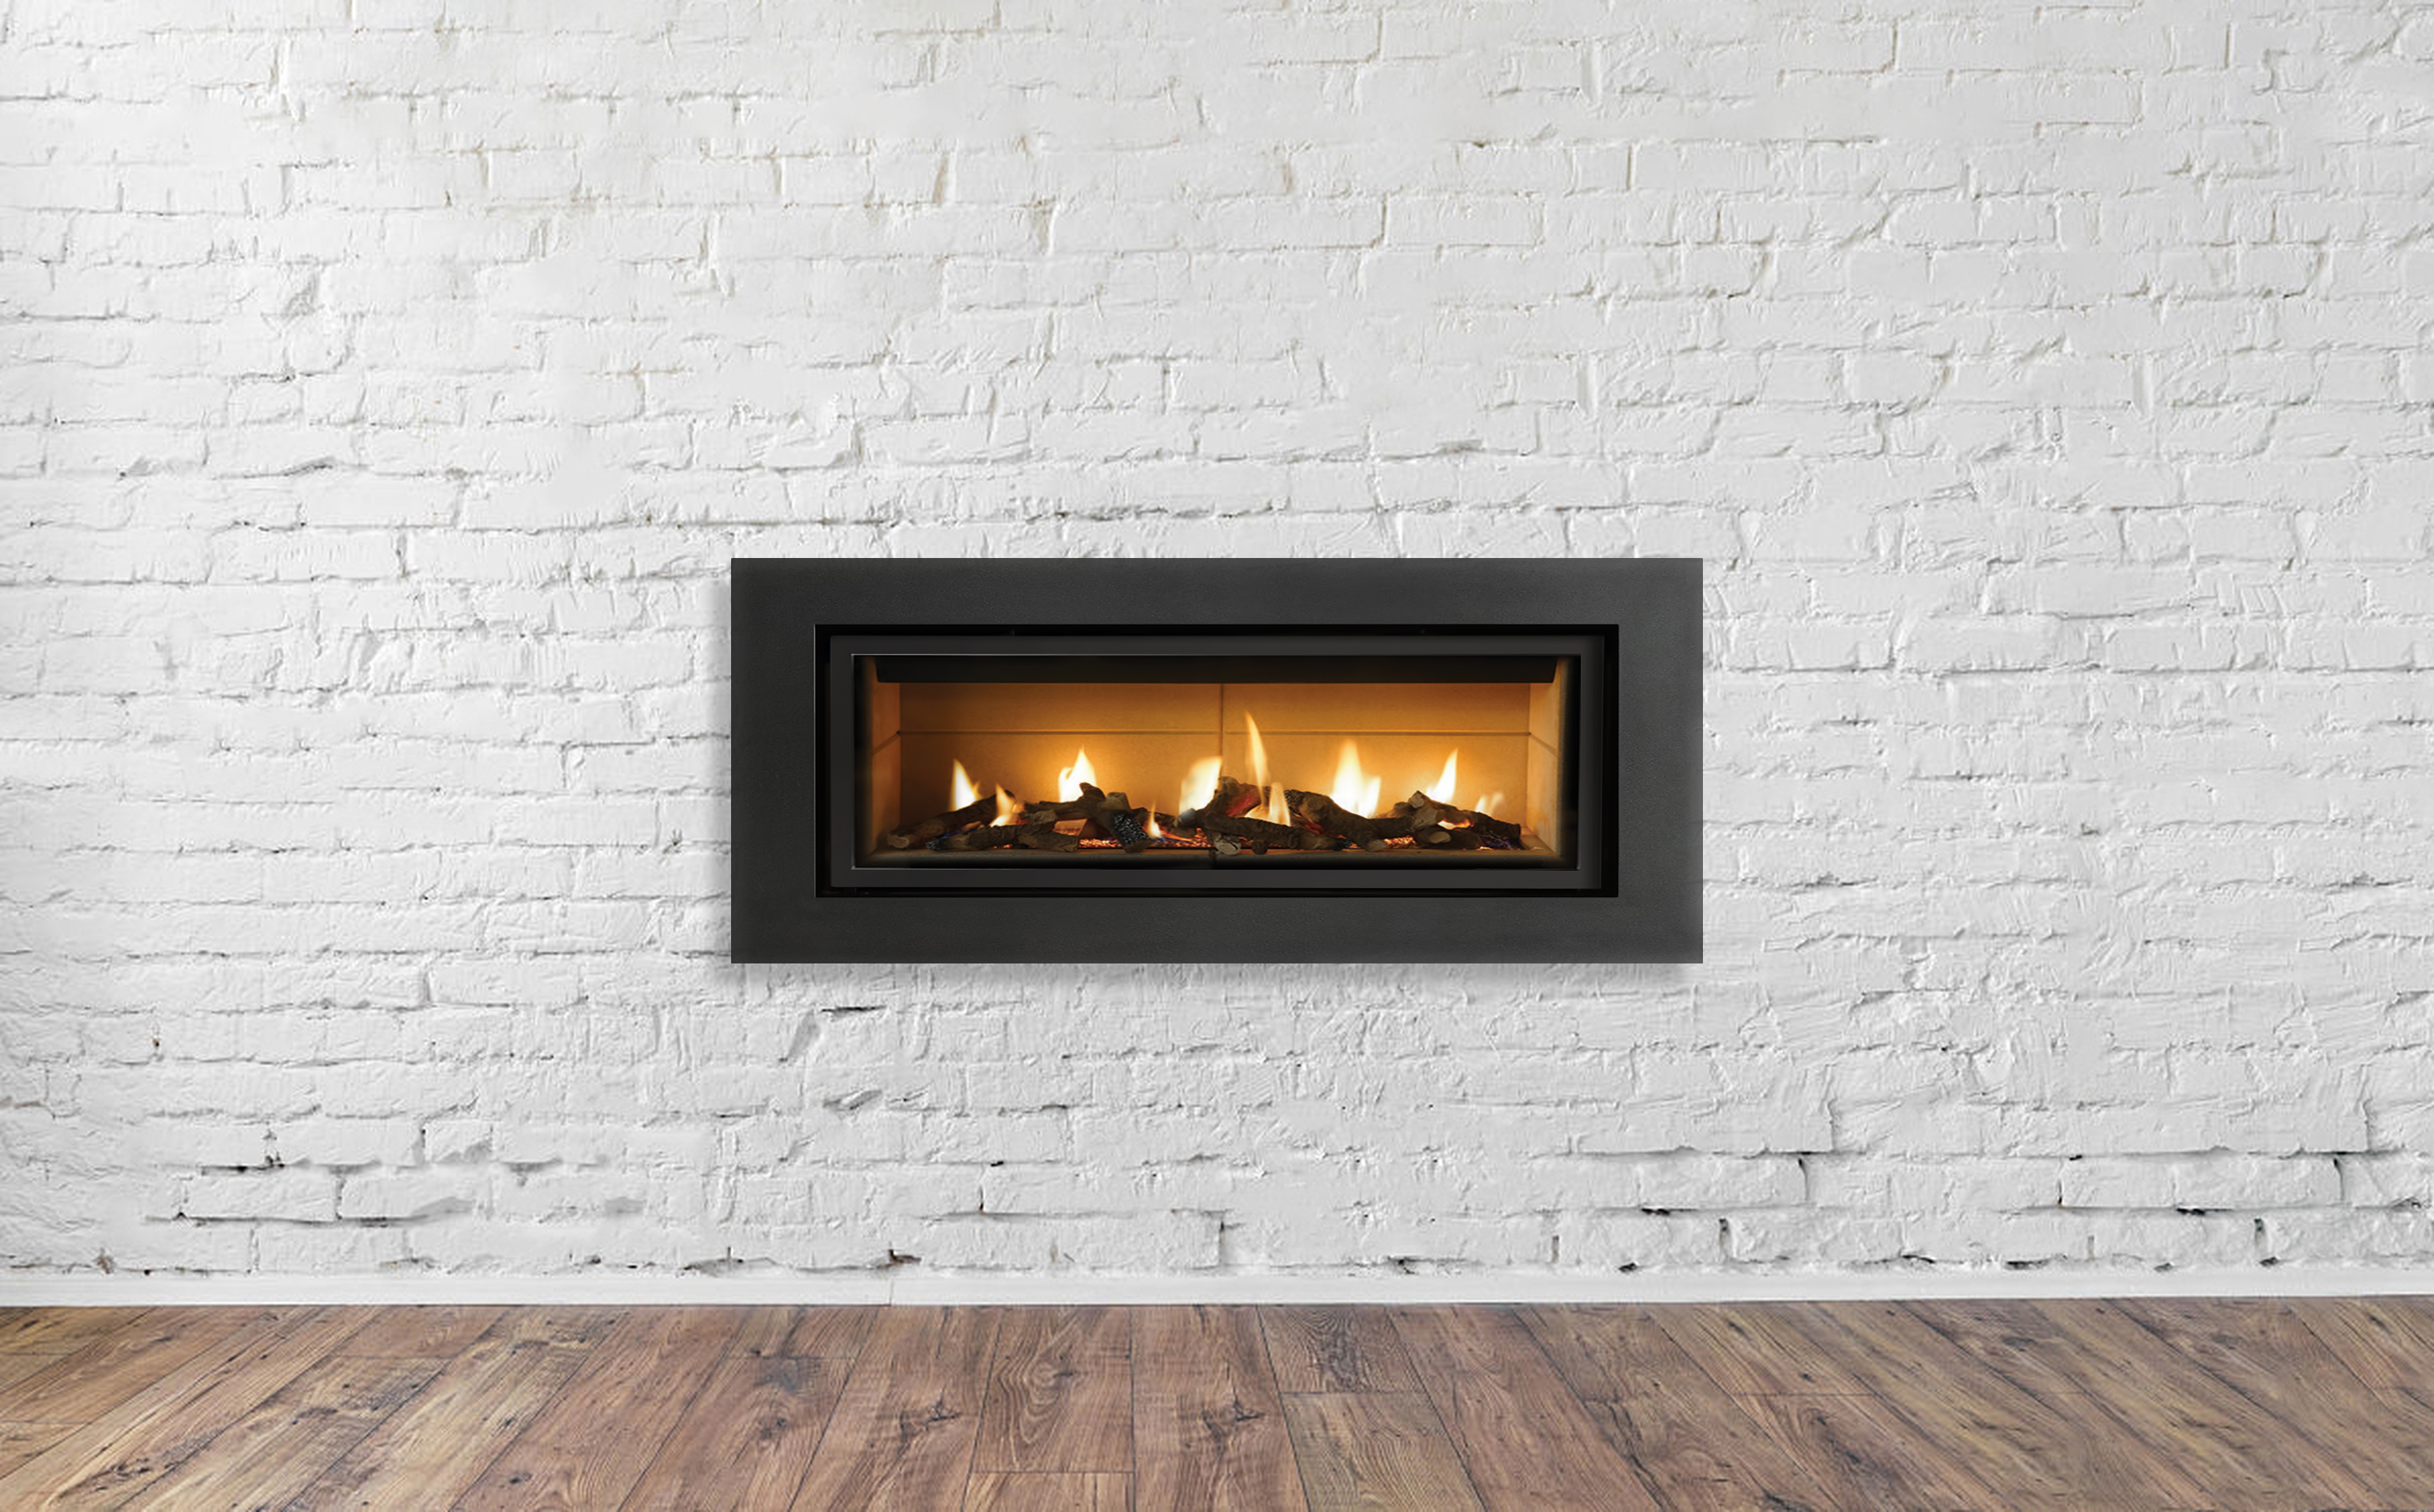 A gas fireplace on a white brick wall | Source: Shutterstock